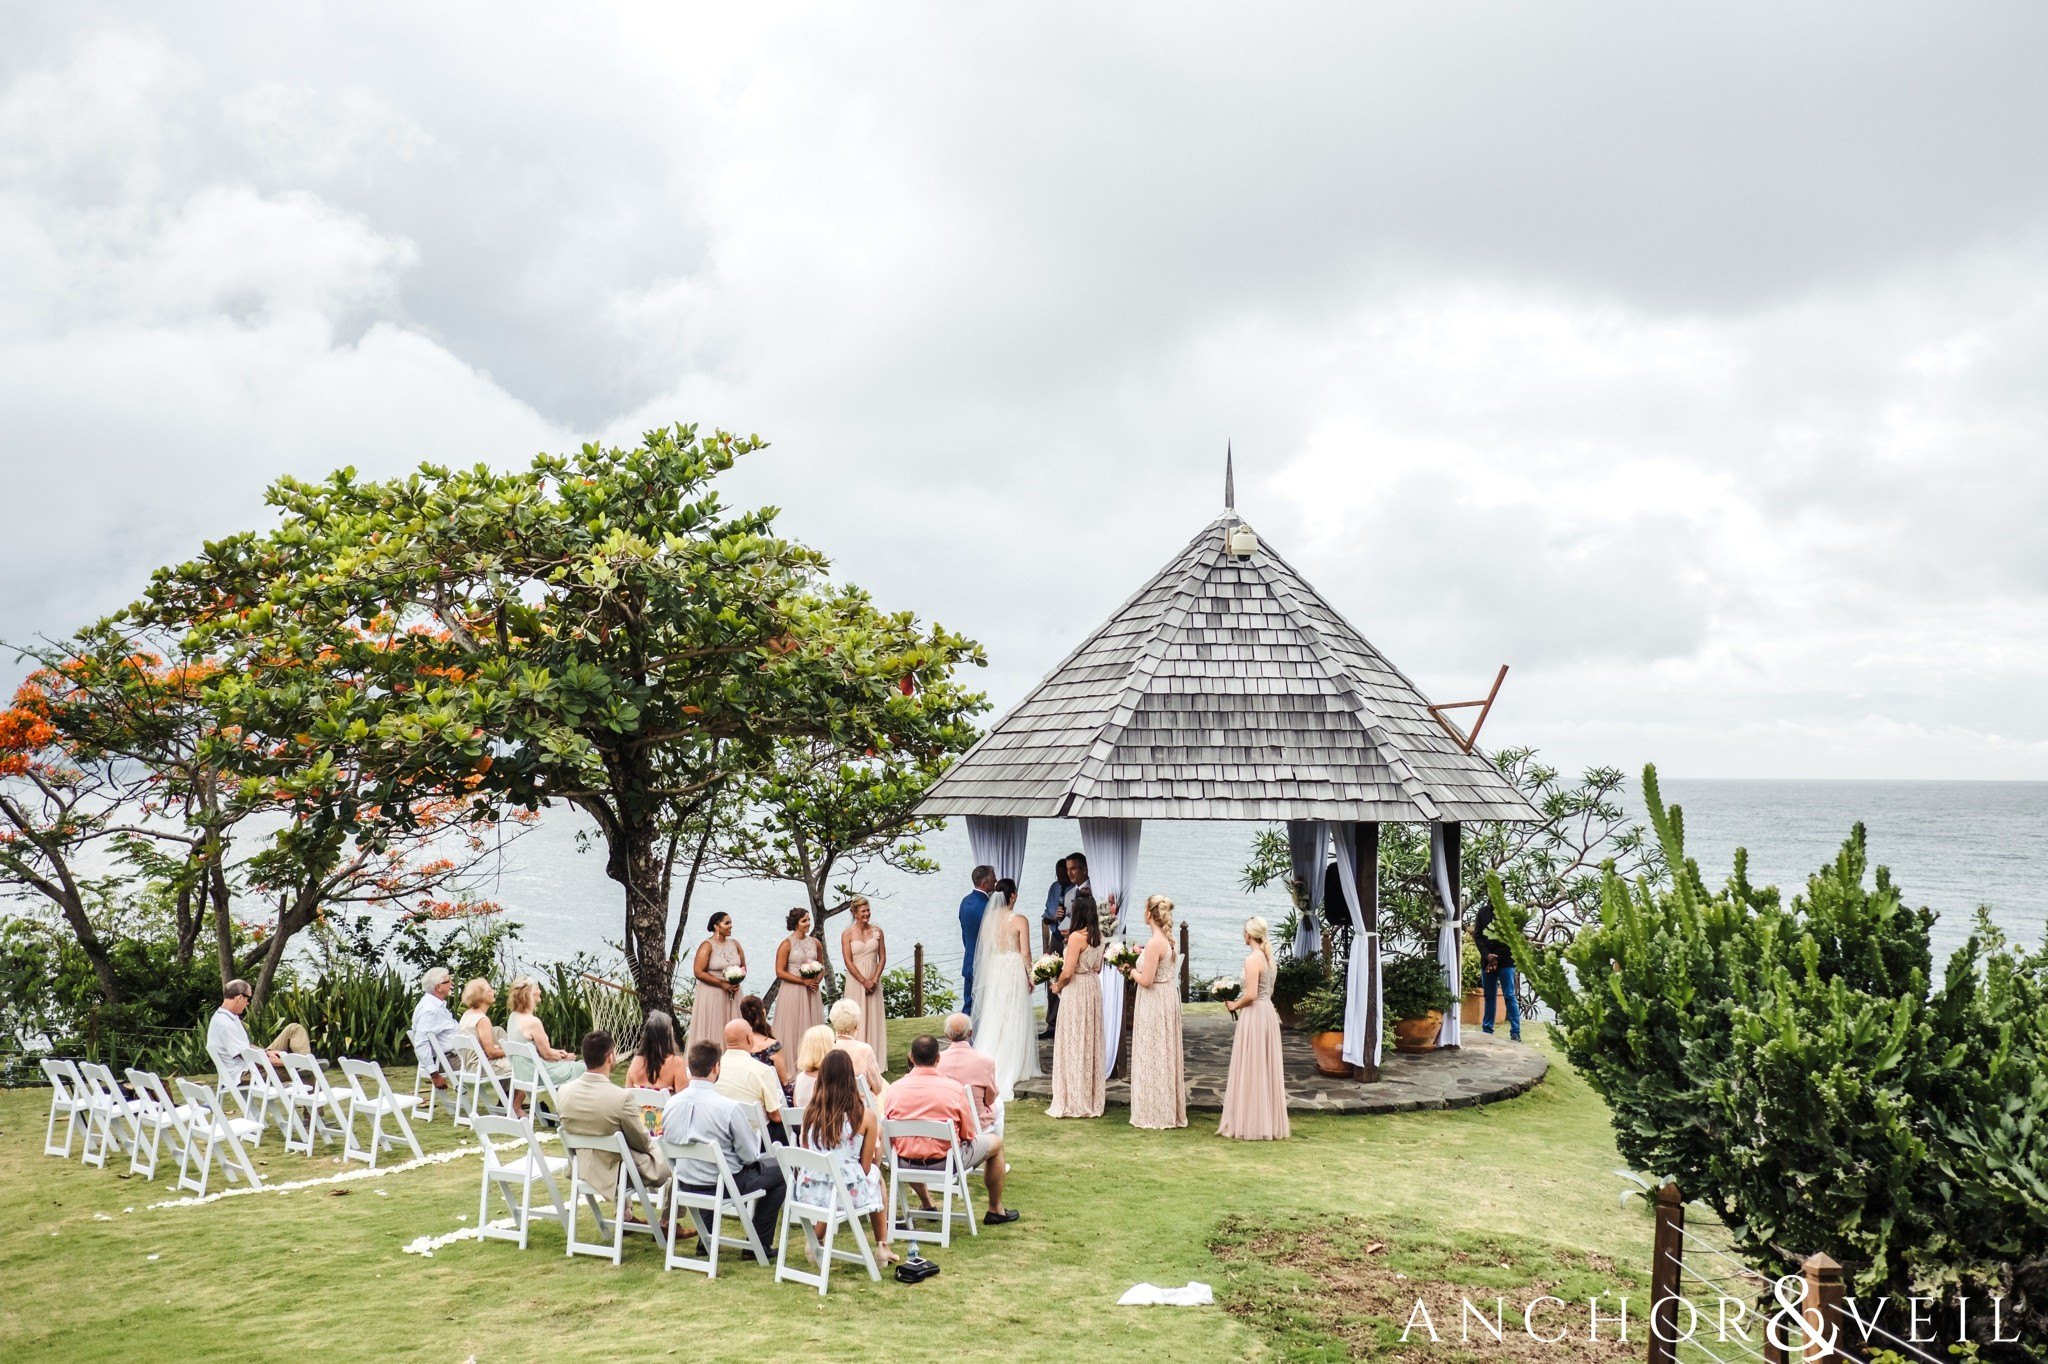 the wedding ceremony During their Cap Maison destination Wedding In St Lucia